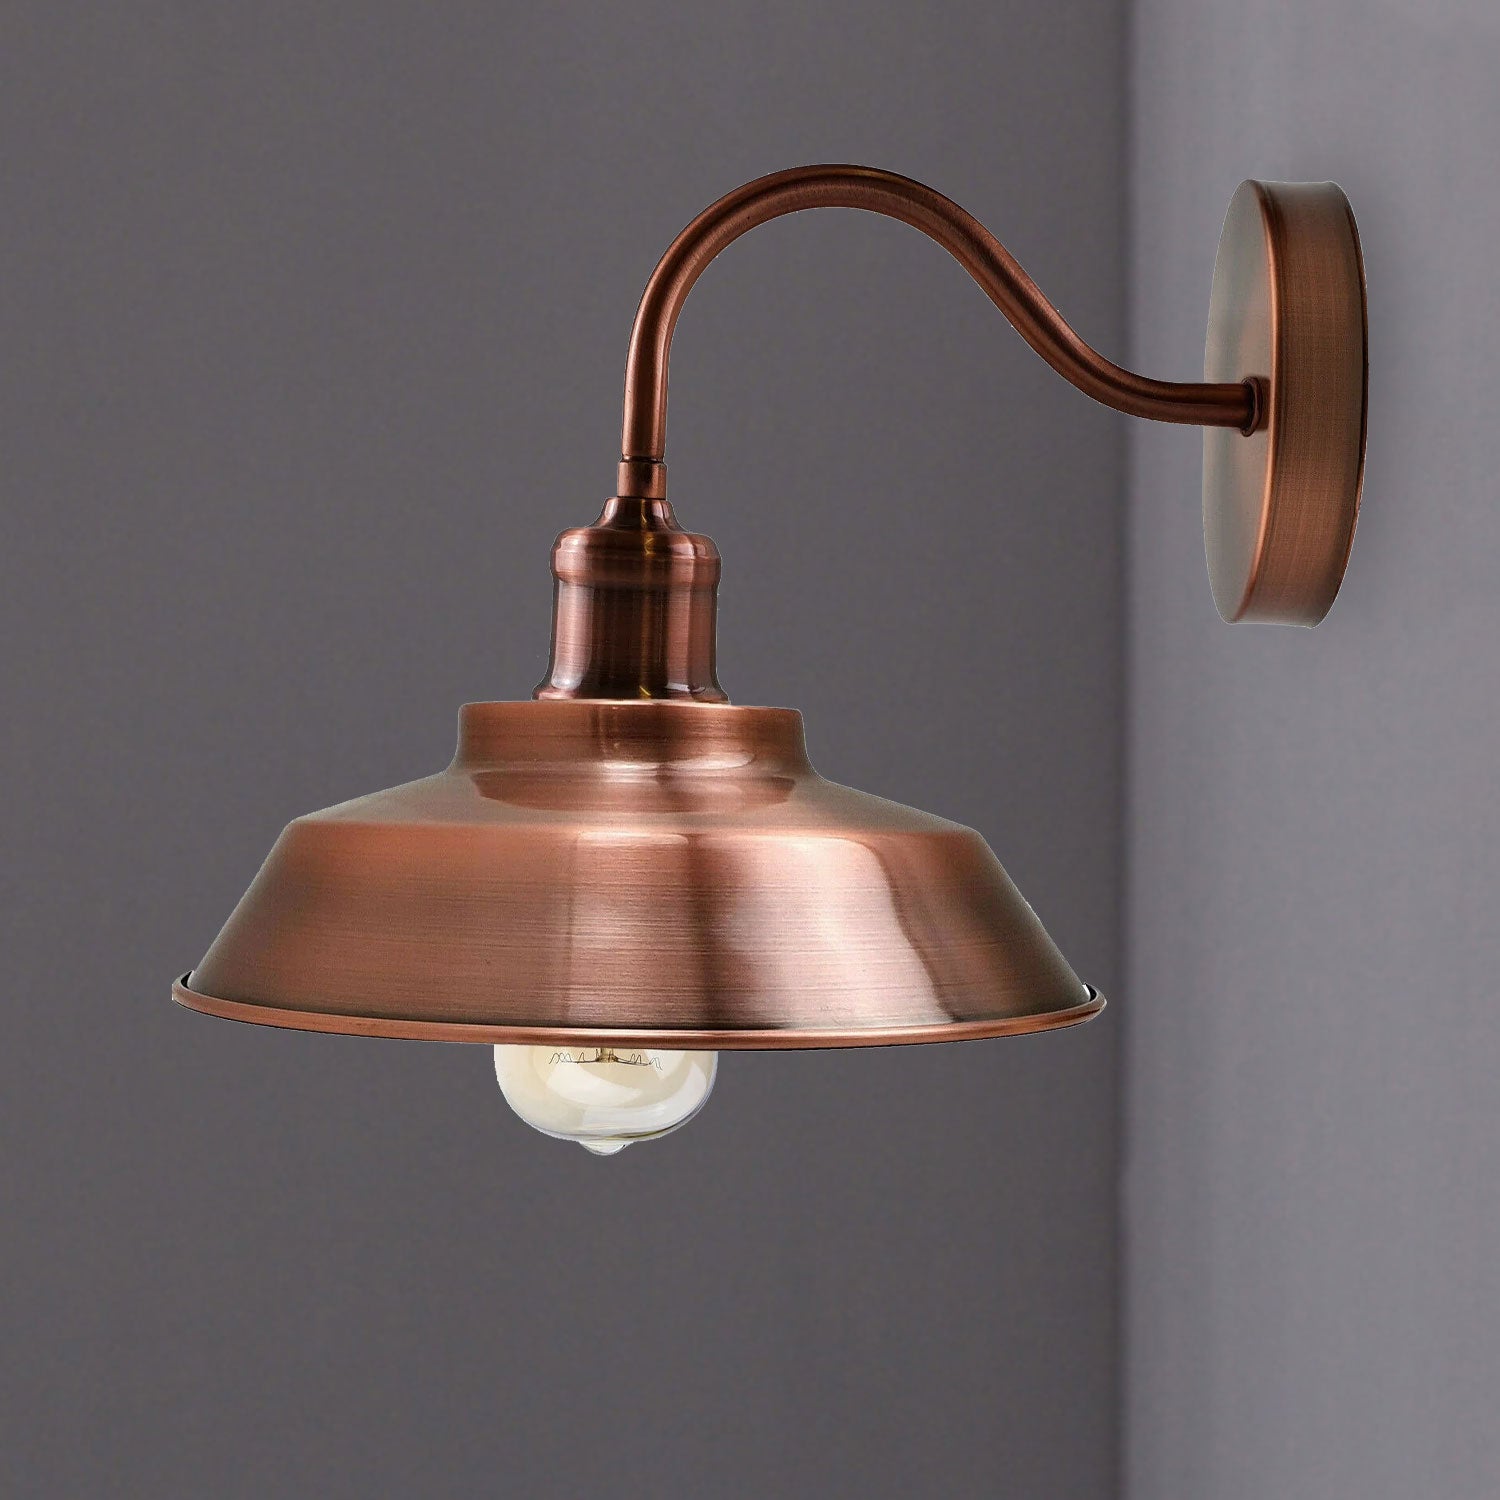 Copper Indoor Industrial Wall Light Modern Wall Sconce Fittings E27 Socket~1739